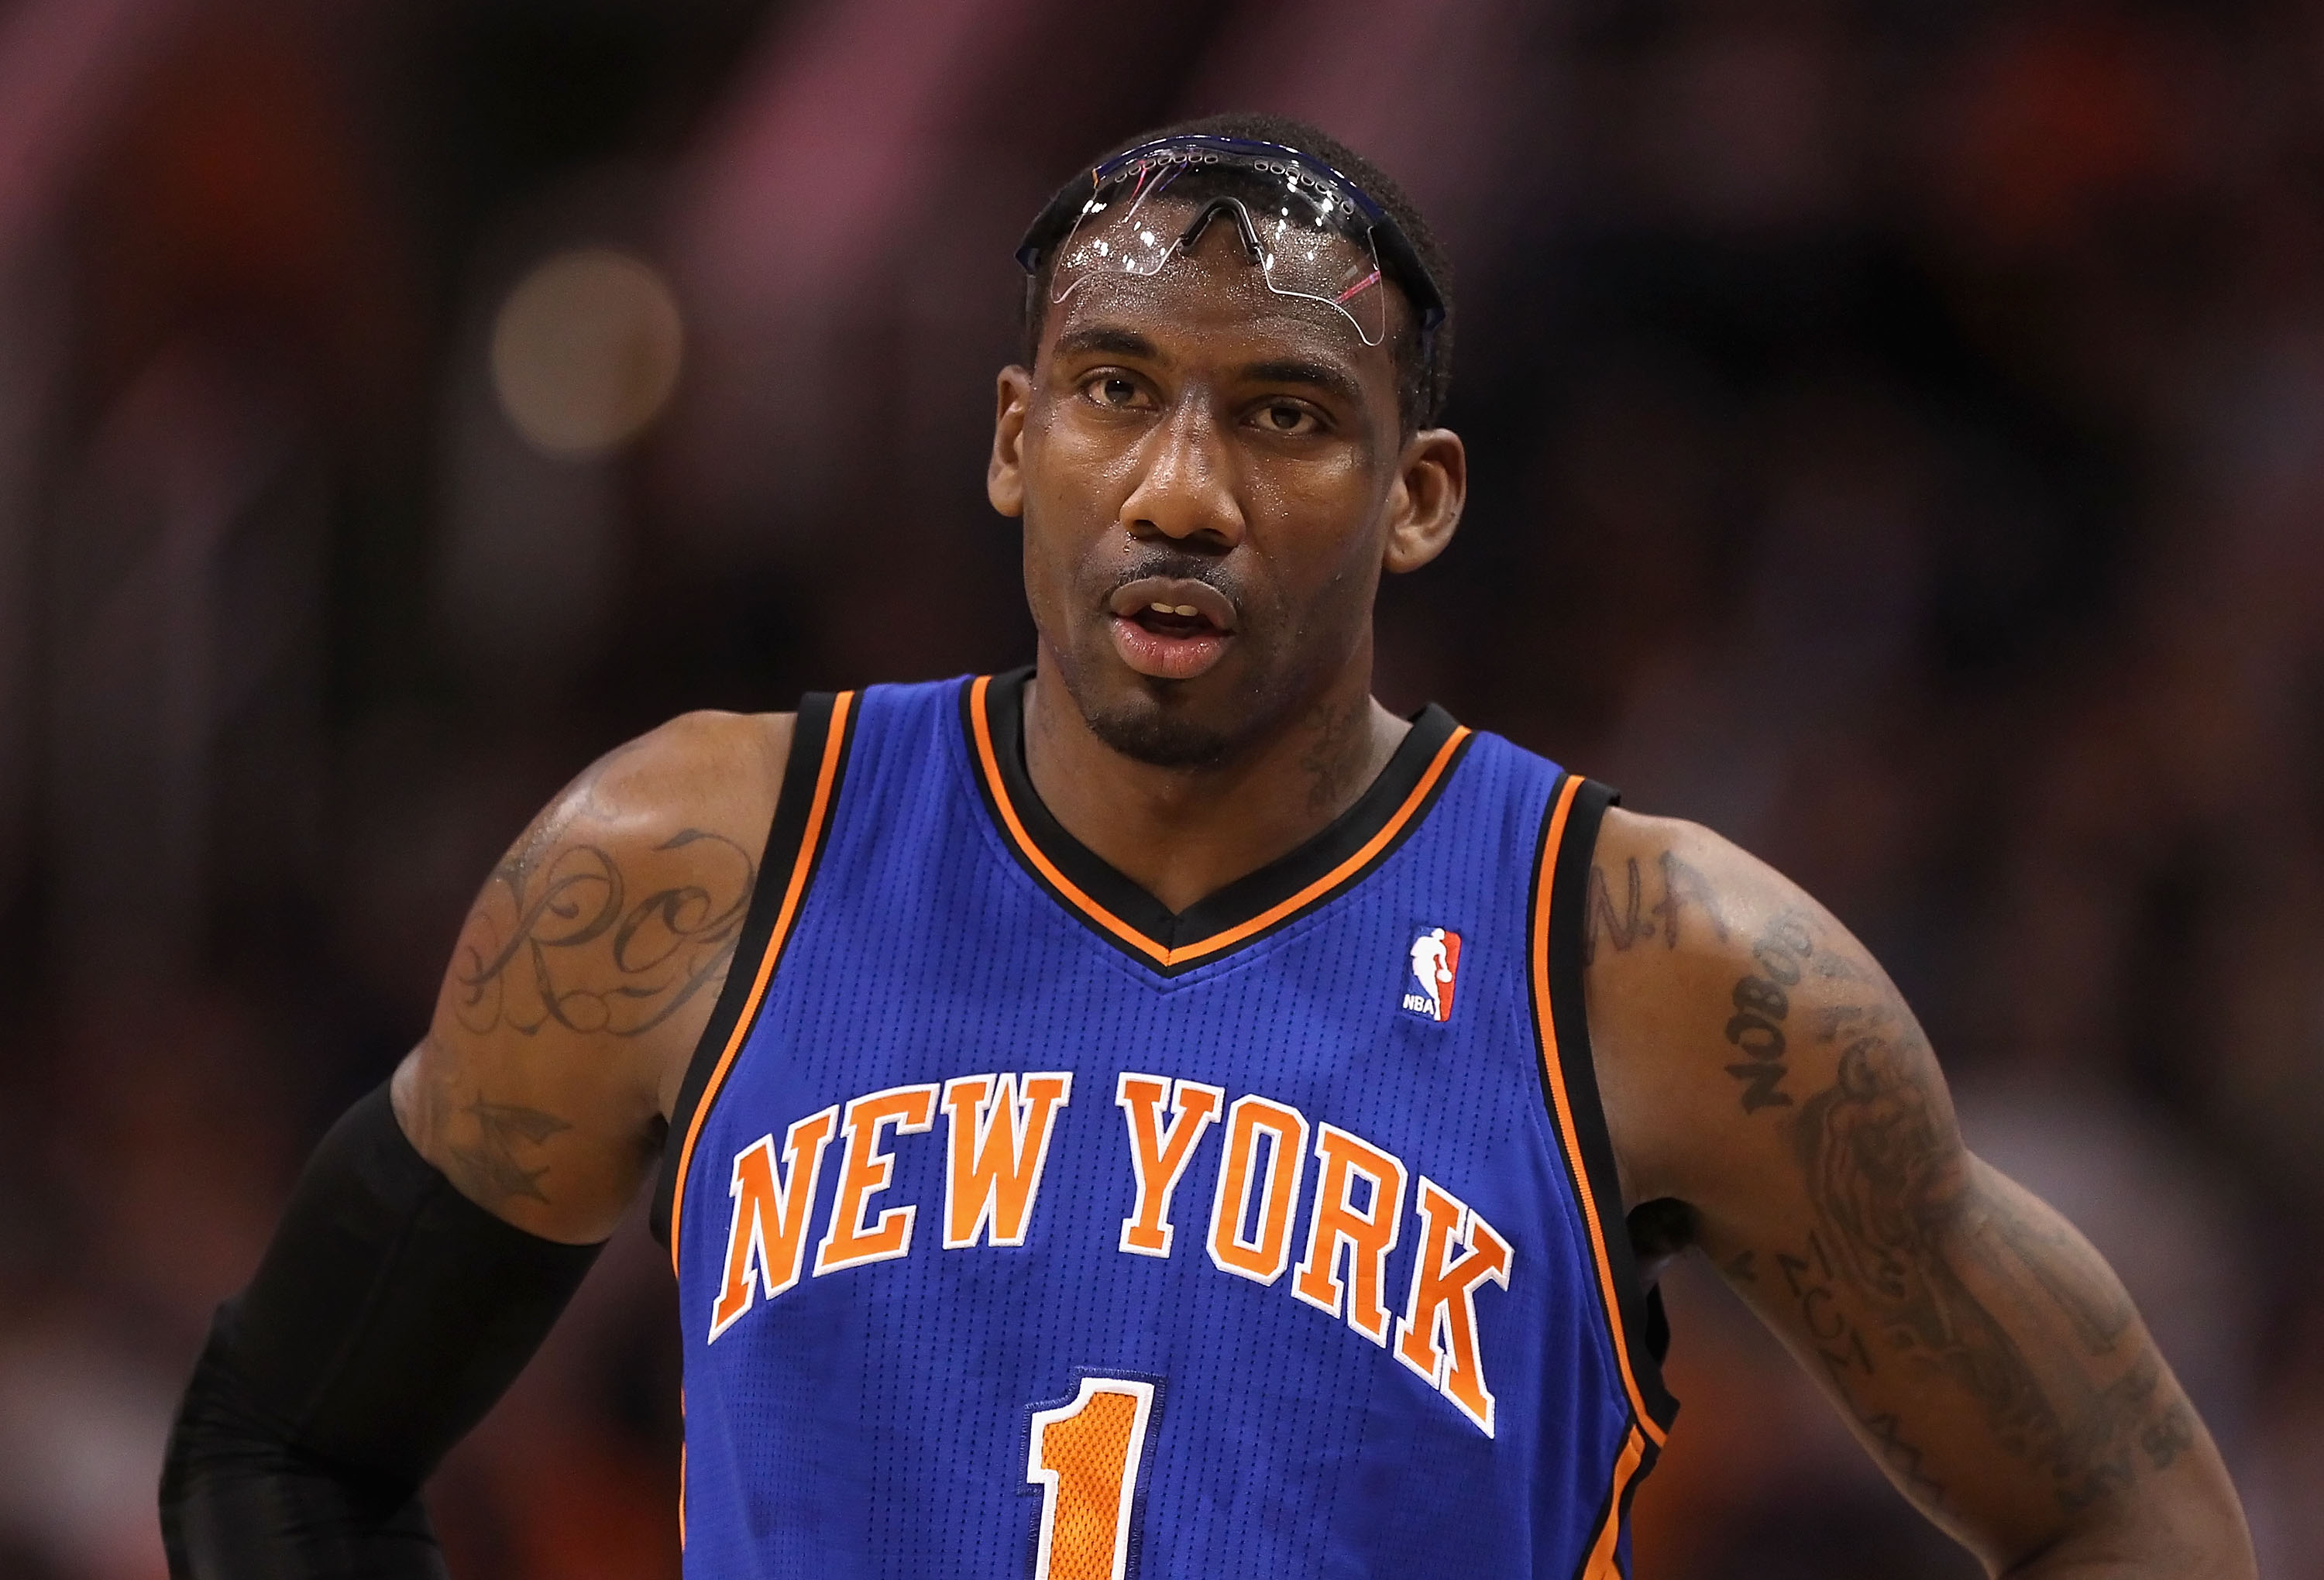 Why Amar'e Stoudemire retired with the Knicks and not the Suns